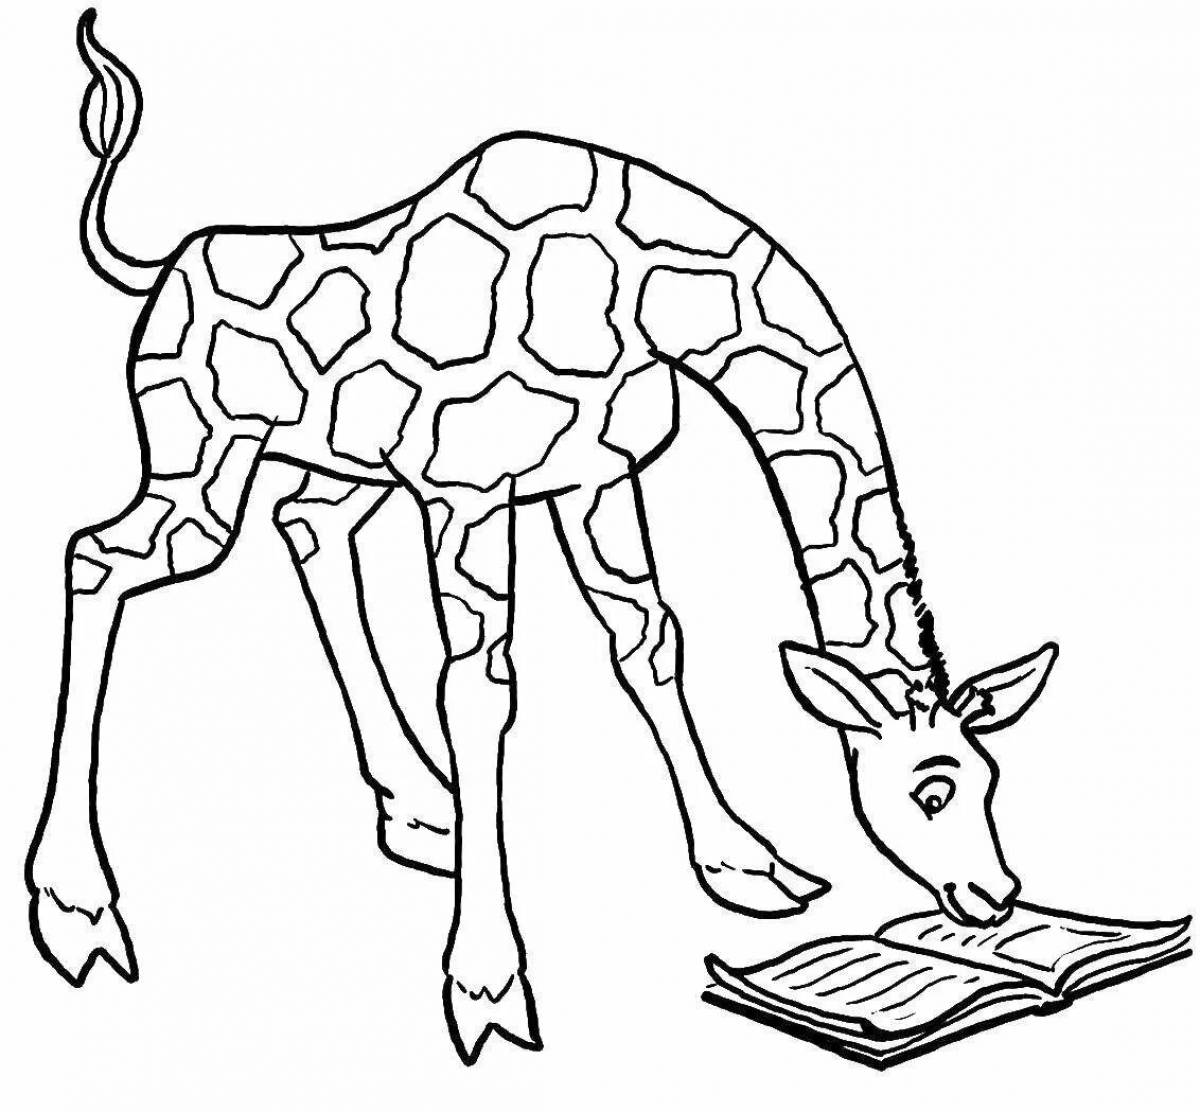 Dazzling giraffe coloring page for 6-7 year olds